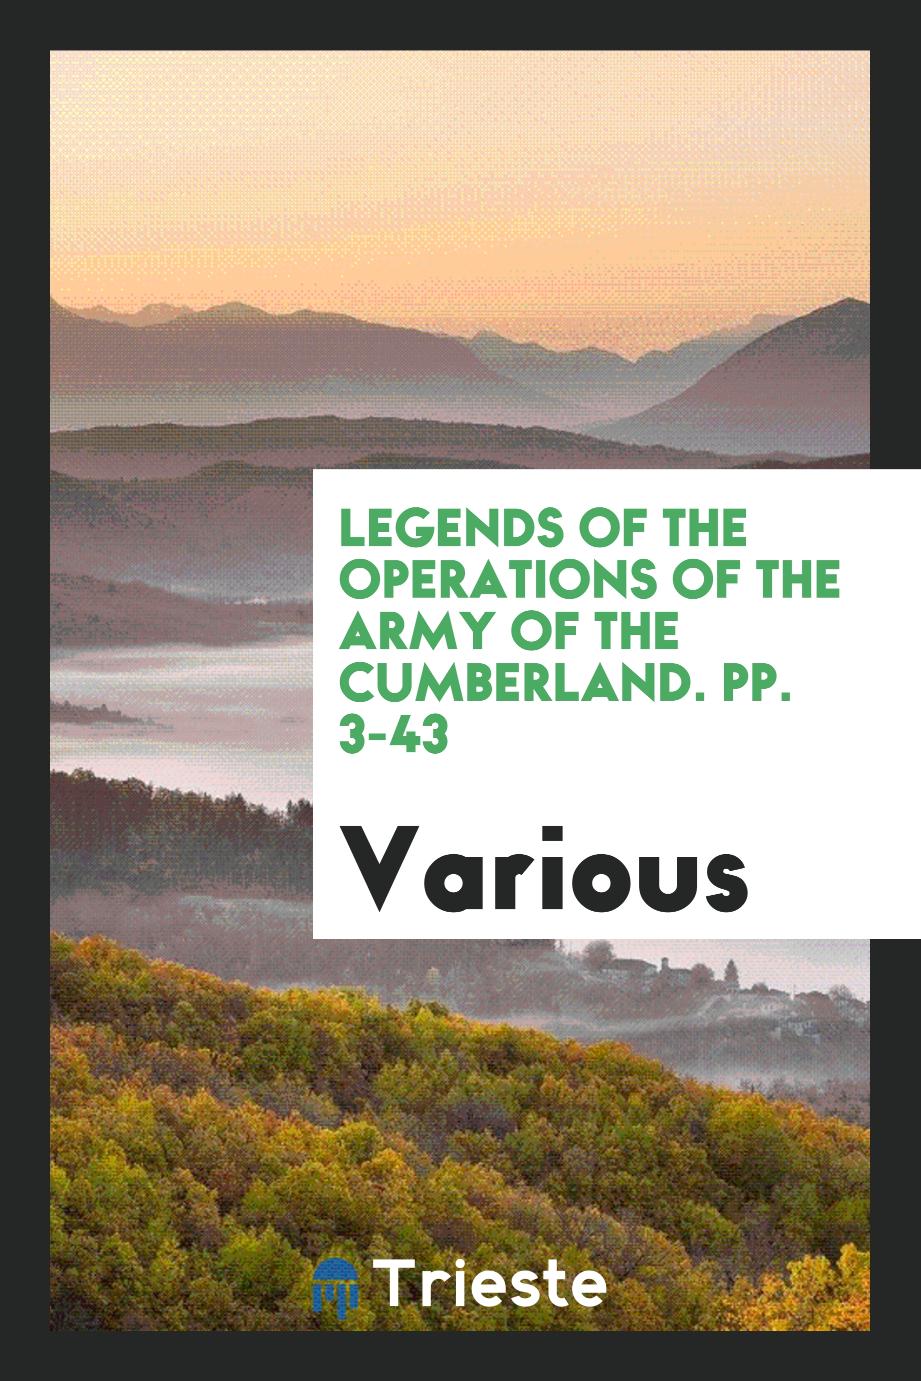 Legends of the Operations of the Army of the Cumberland. pp. 3-43